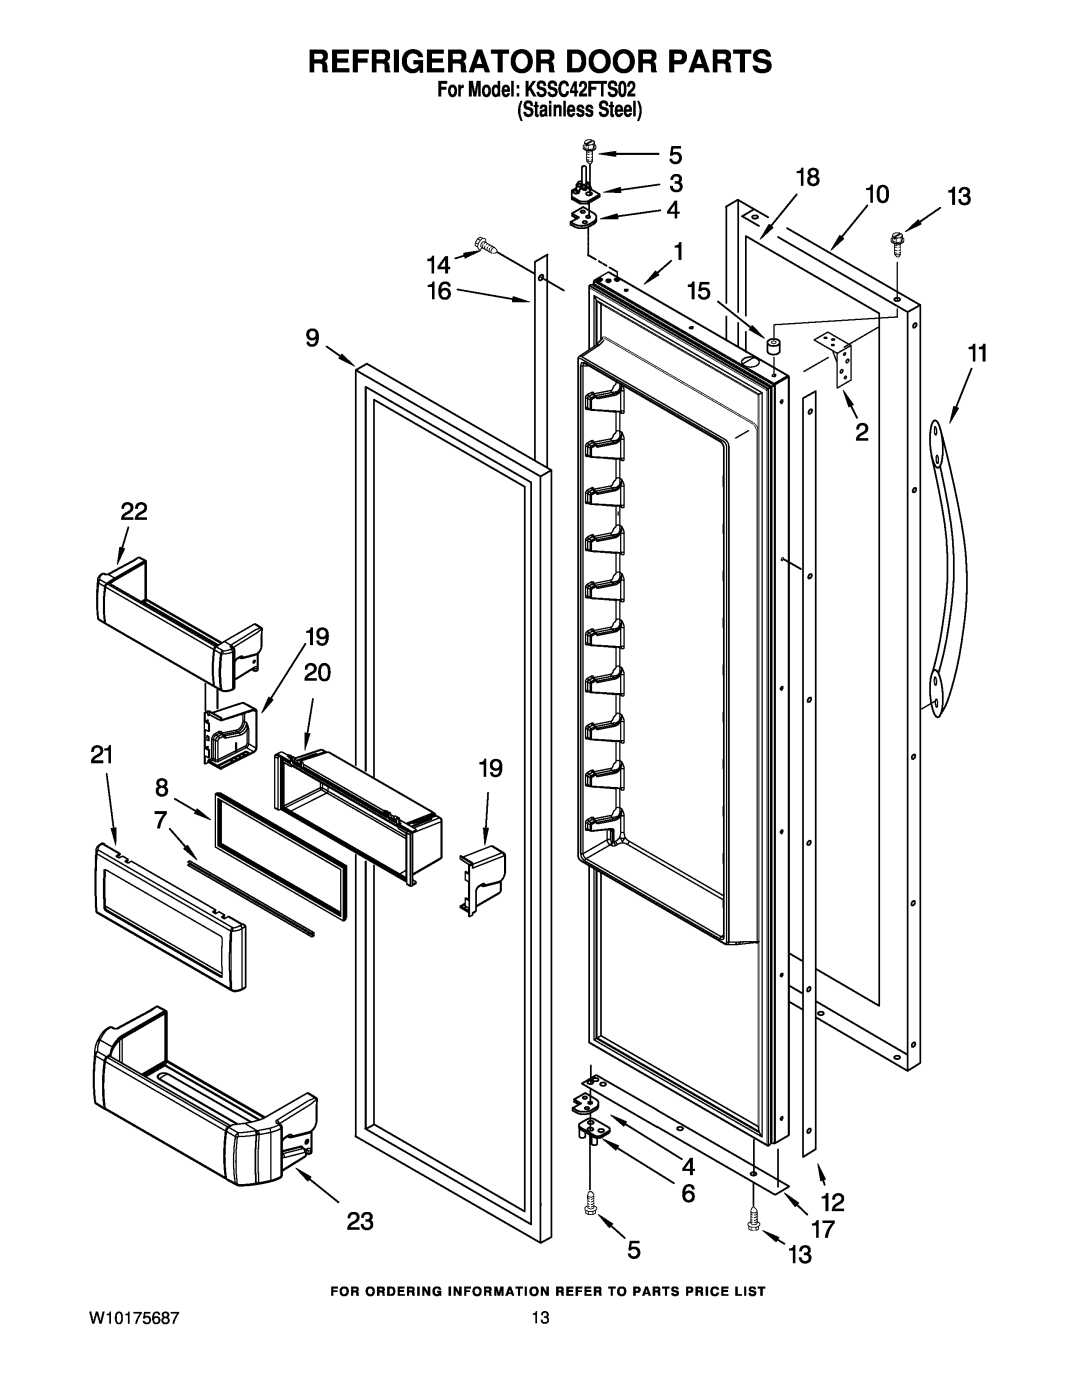 KitchenAid manual Refrigerator Door Parts, W10175687, For Model KSSC42FTS02 Stainless Steel 